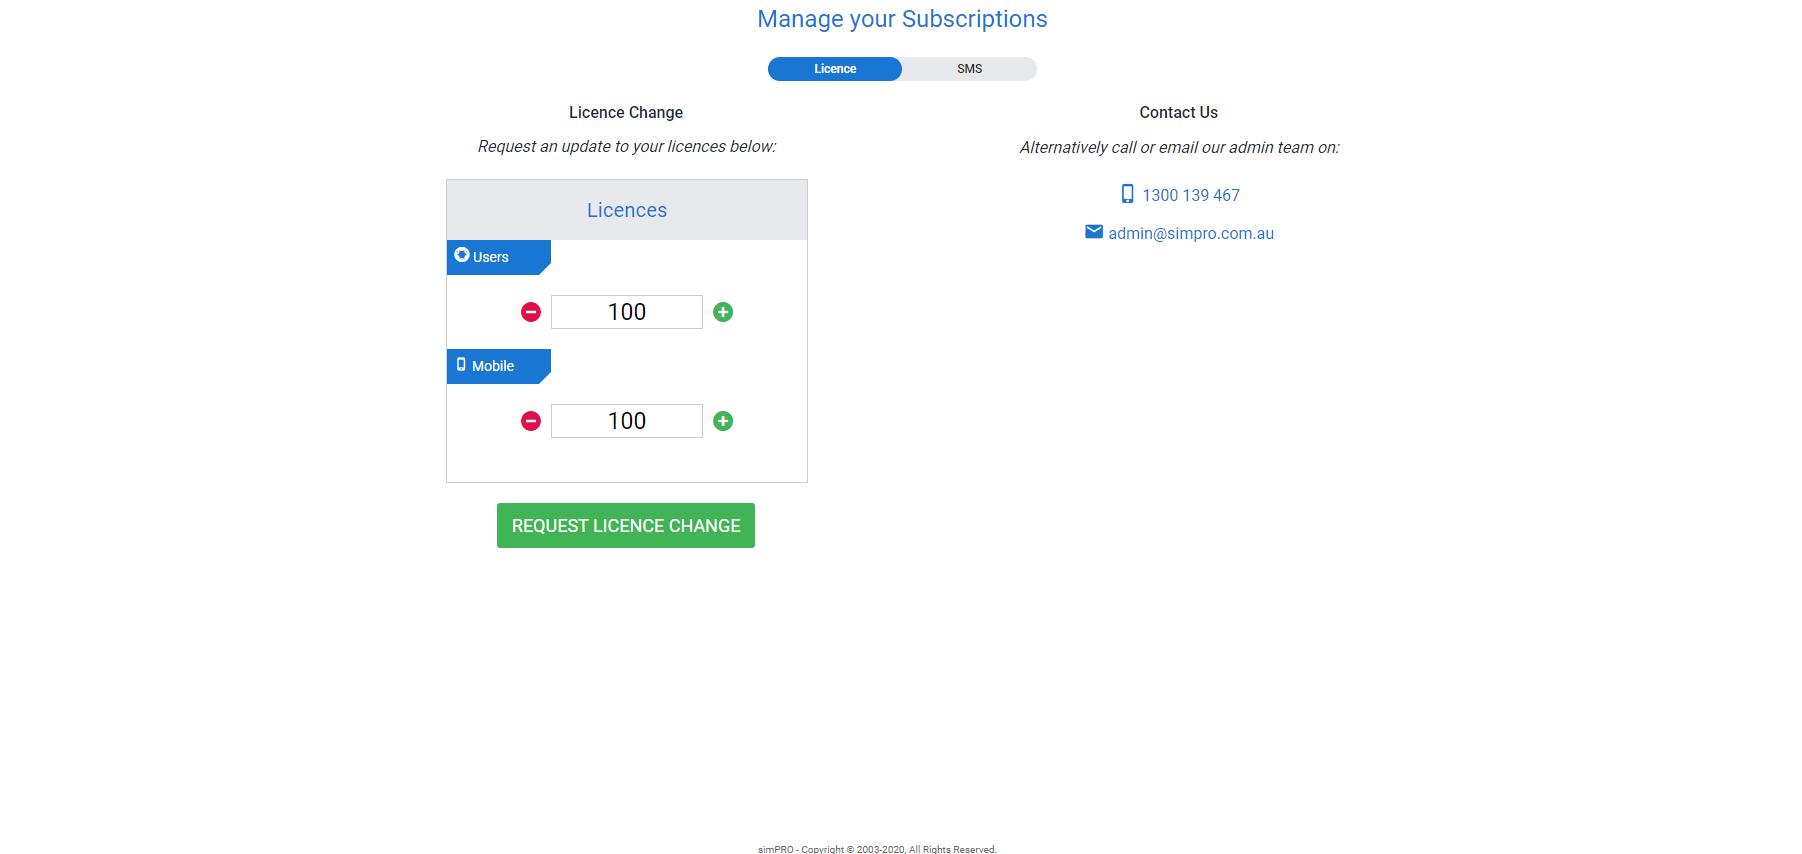 A screenshot of the Manage your Subscriptions page.